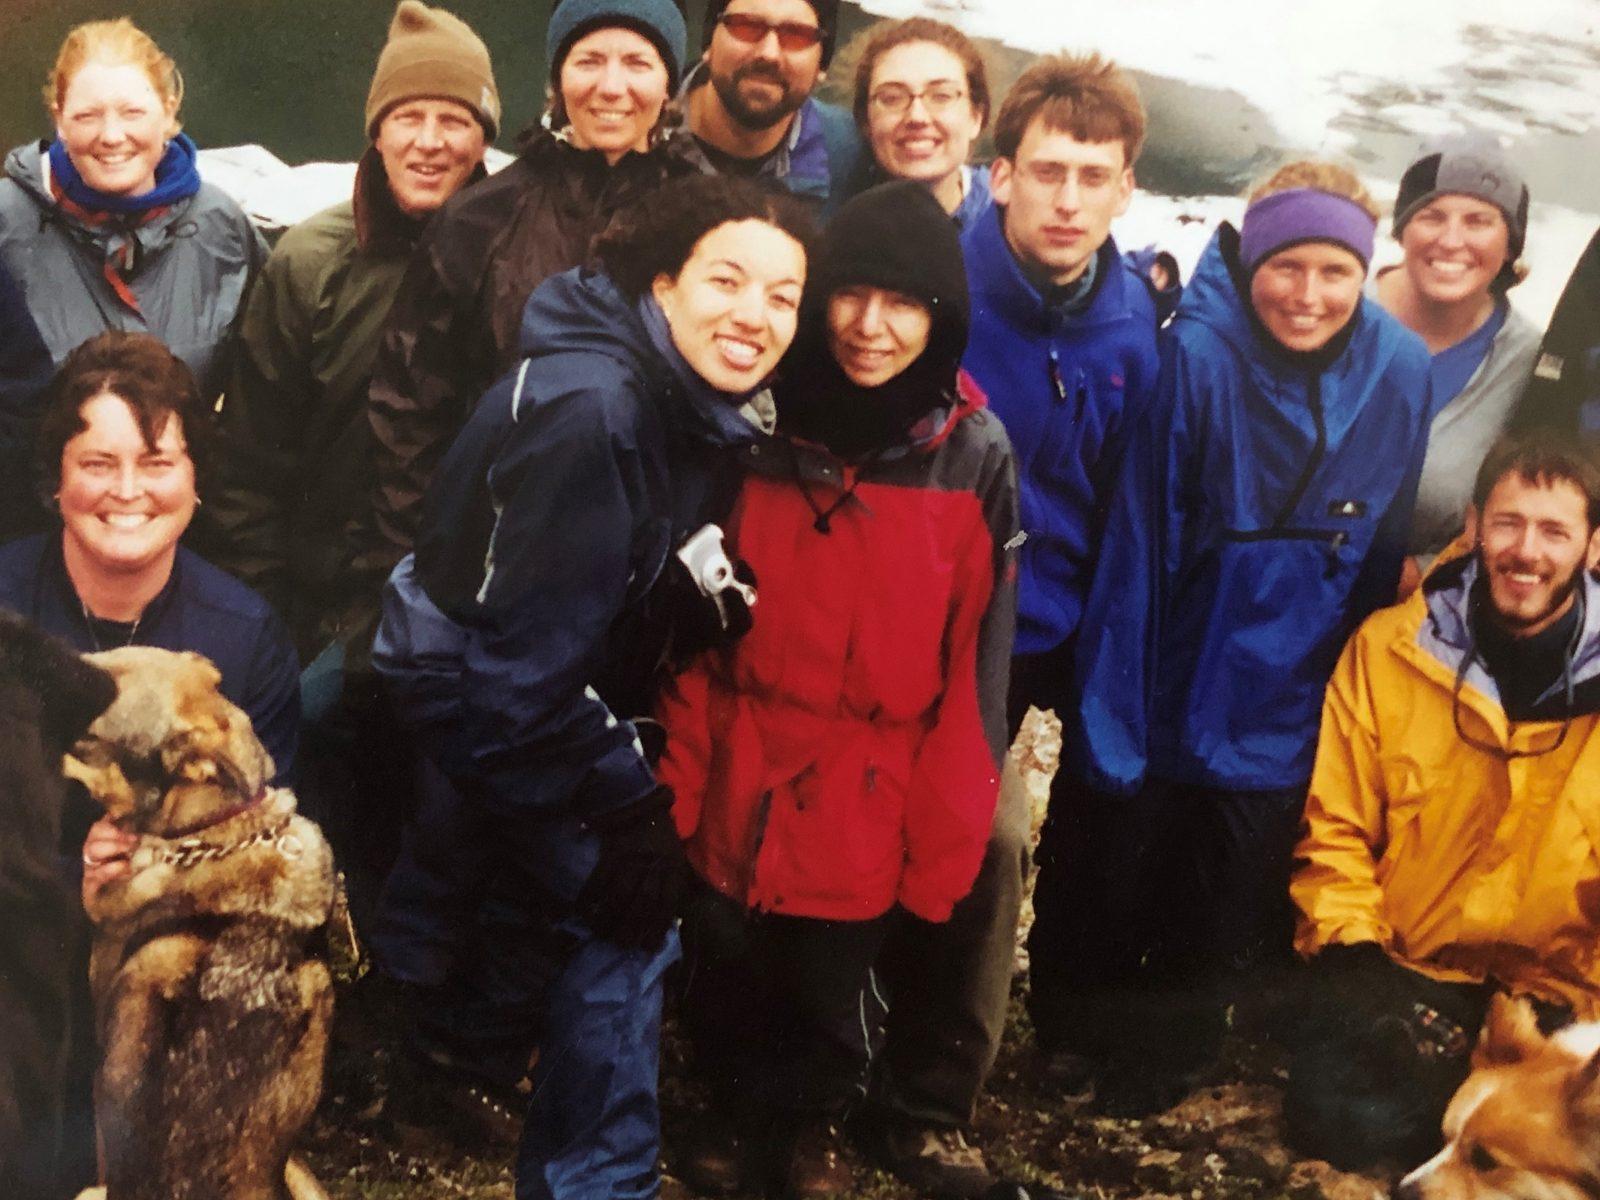 The Trustees for Alaska gang from the 1990s.